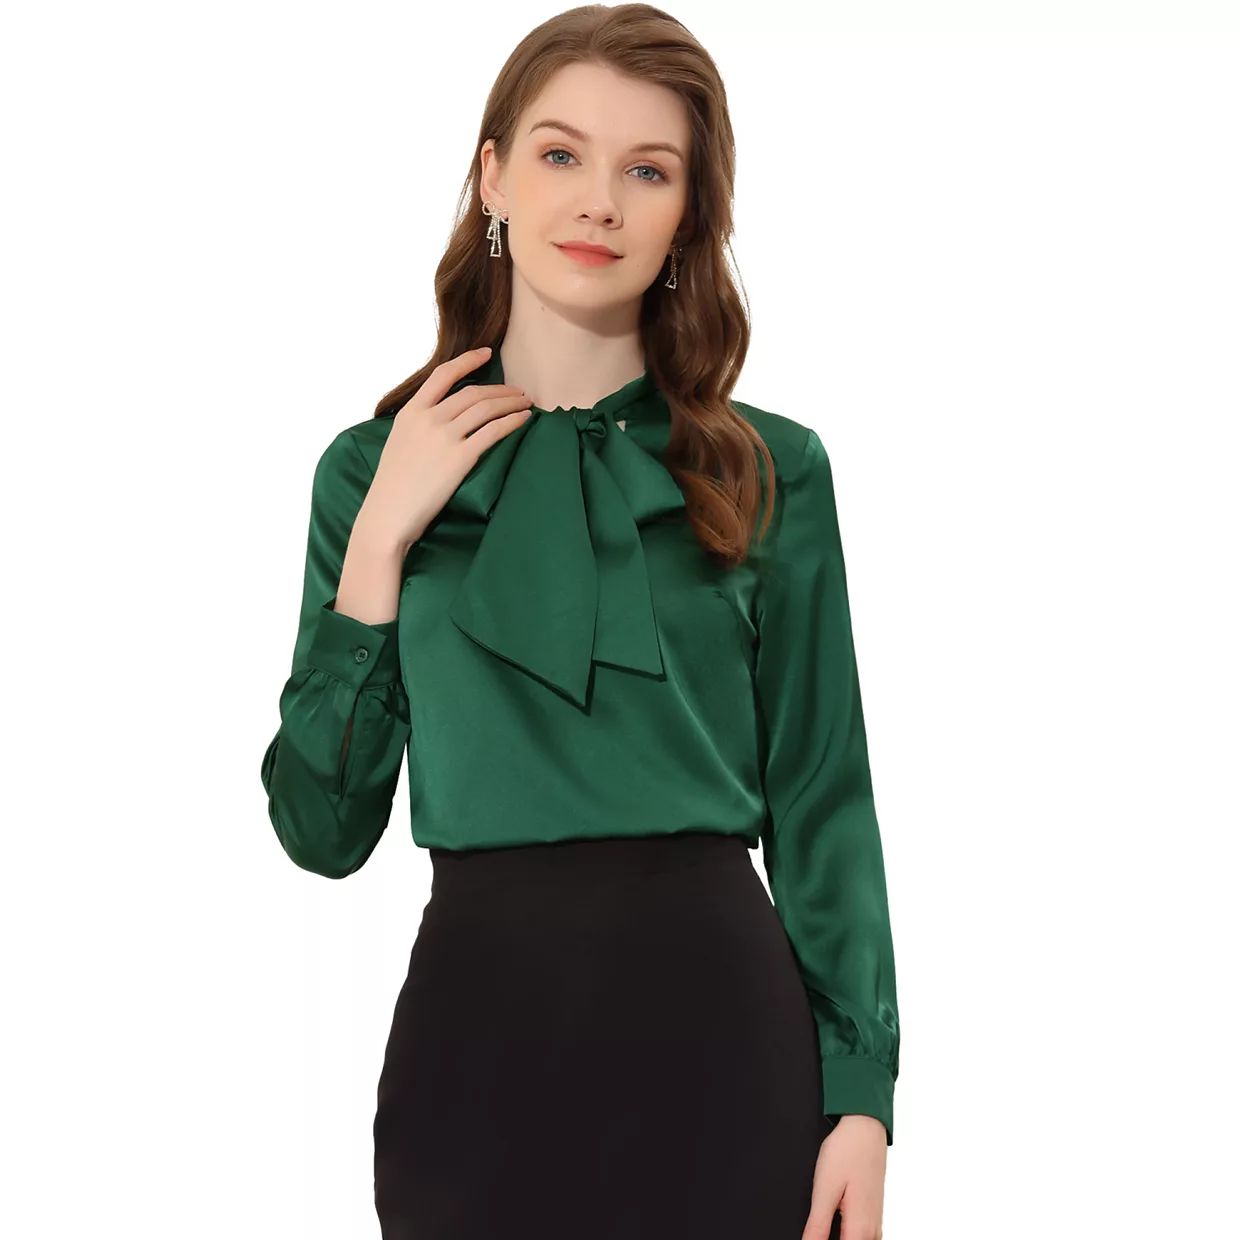 Satin Blouse For Women's Bow Tie Neck Solid Work Office Shirt | Kohl's